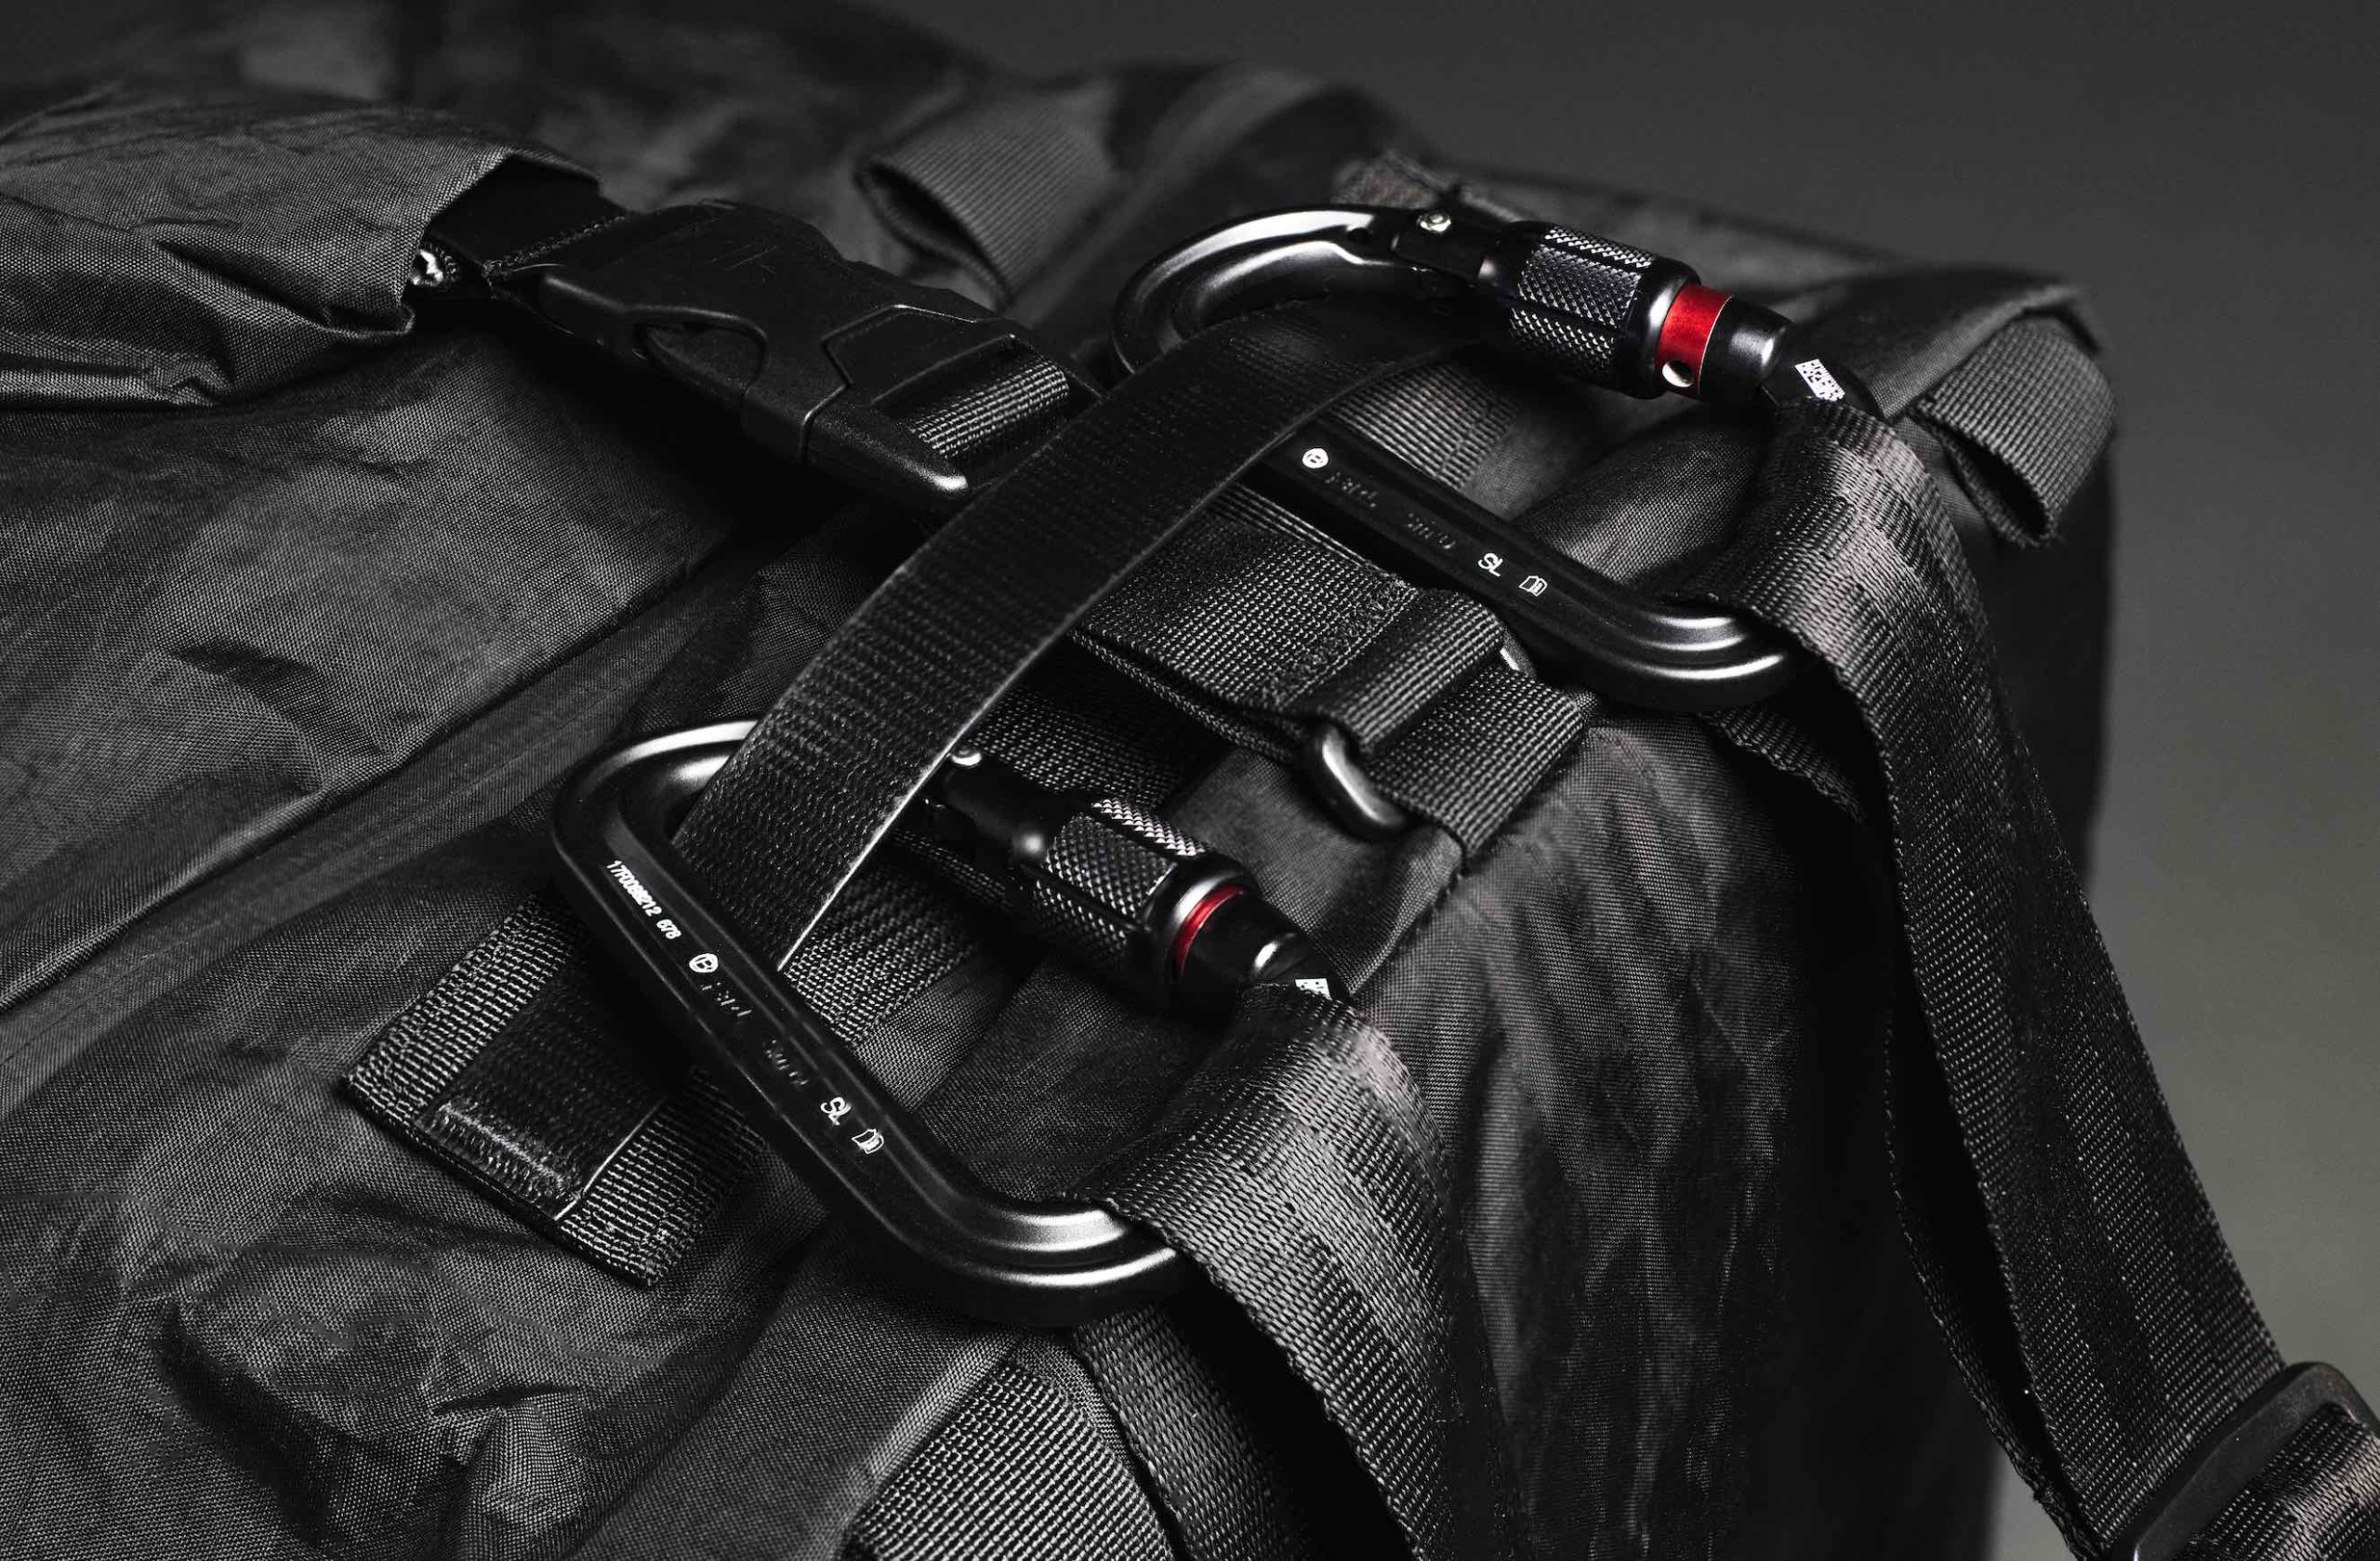 Black Mile Travel Bag Product Photography Closeup view of fasteners on black bag